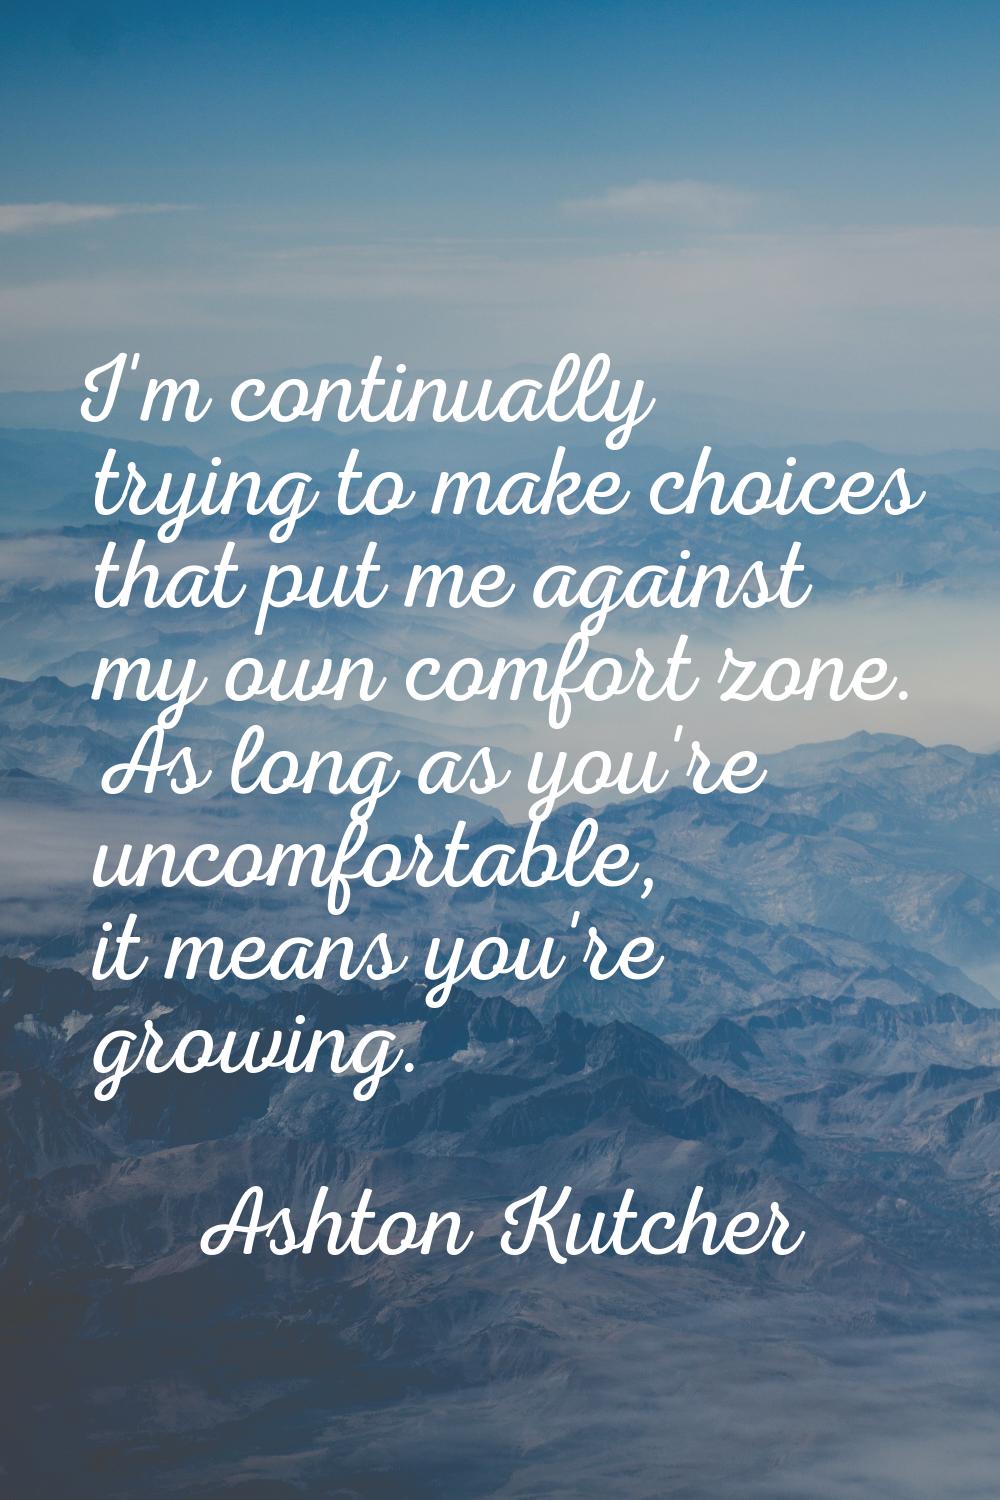 I'm continually trying to make choices that put me against my own comfort zone. As long as you're u